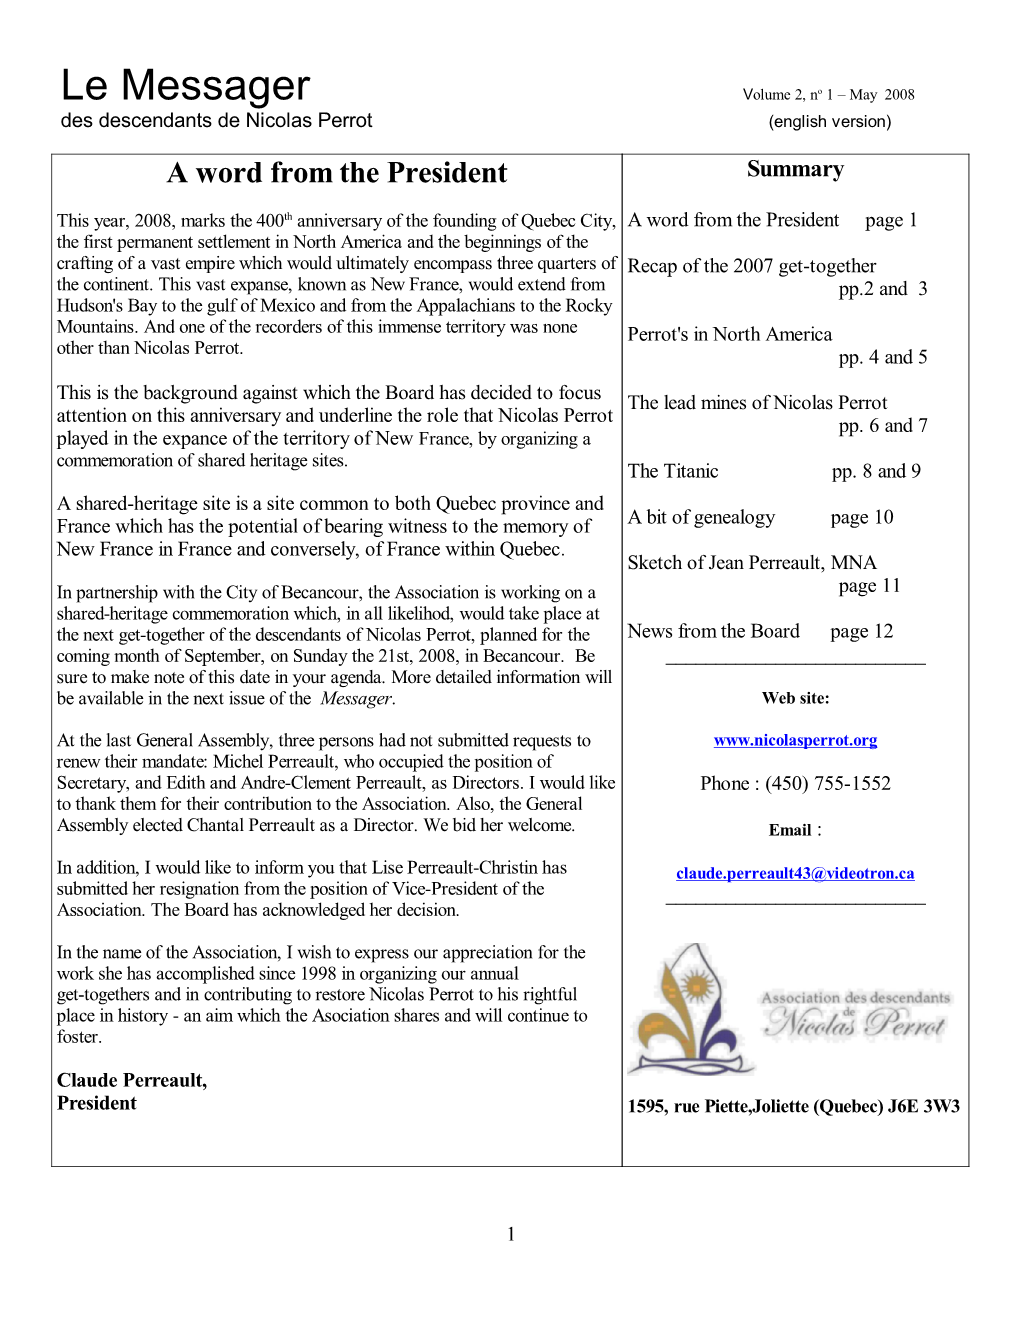 Le Messager Volume 2, No 1 ± May 2008 Des Descendants De Nicolas Perrot (English Version) a Word from the President Summary